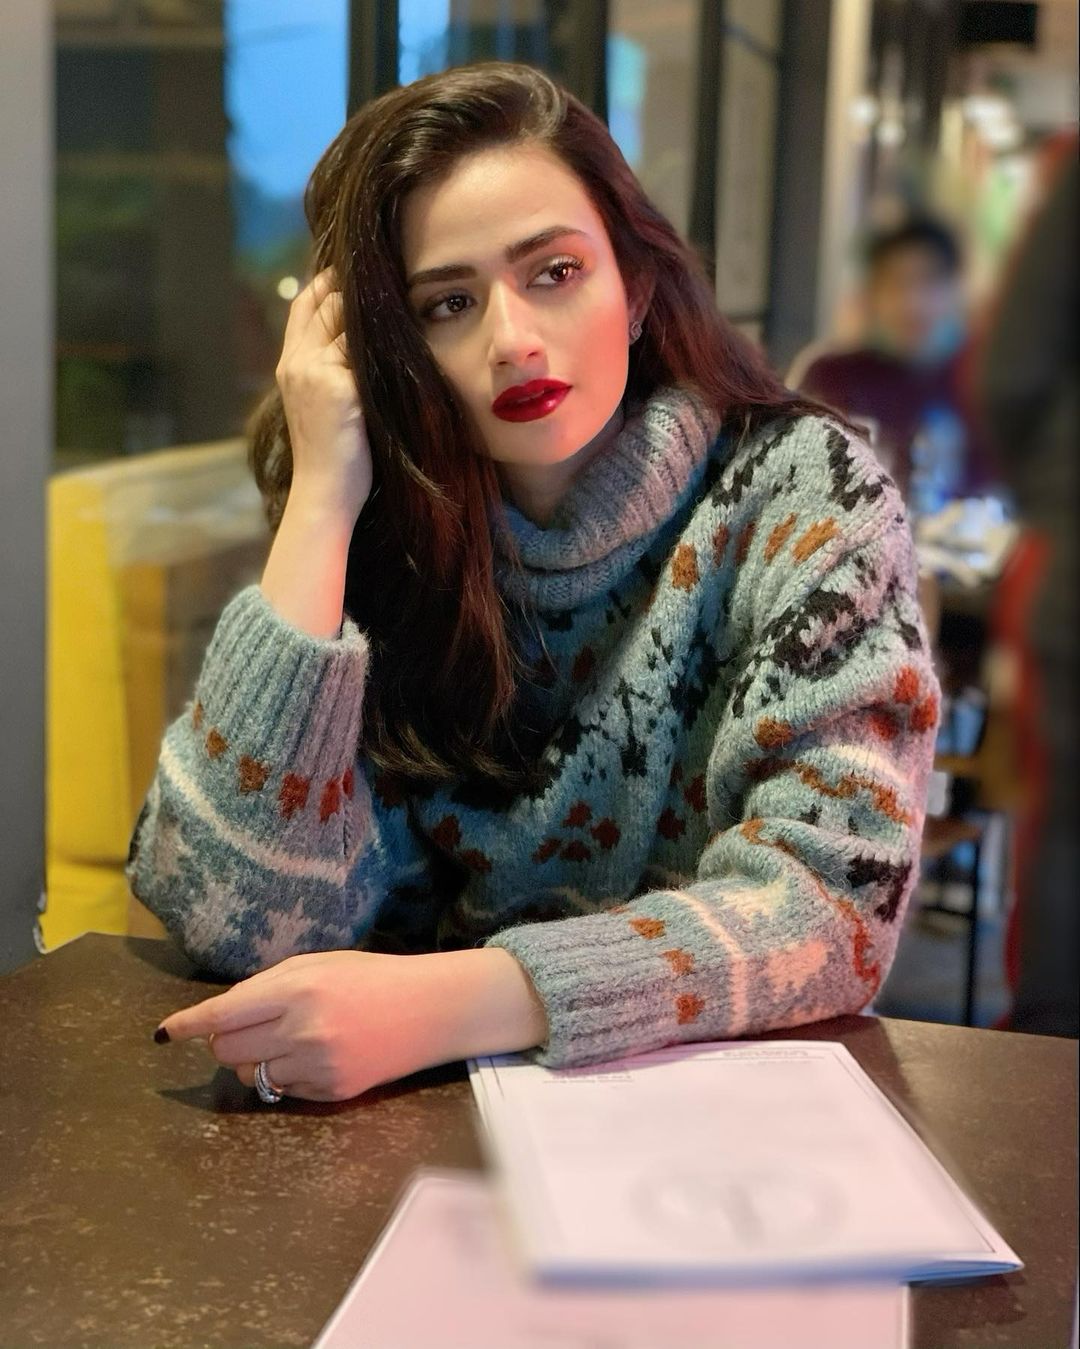 Latest Pictures of Sana Javed with her Husband Umair Jaswal